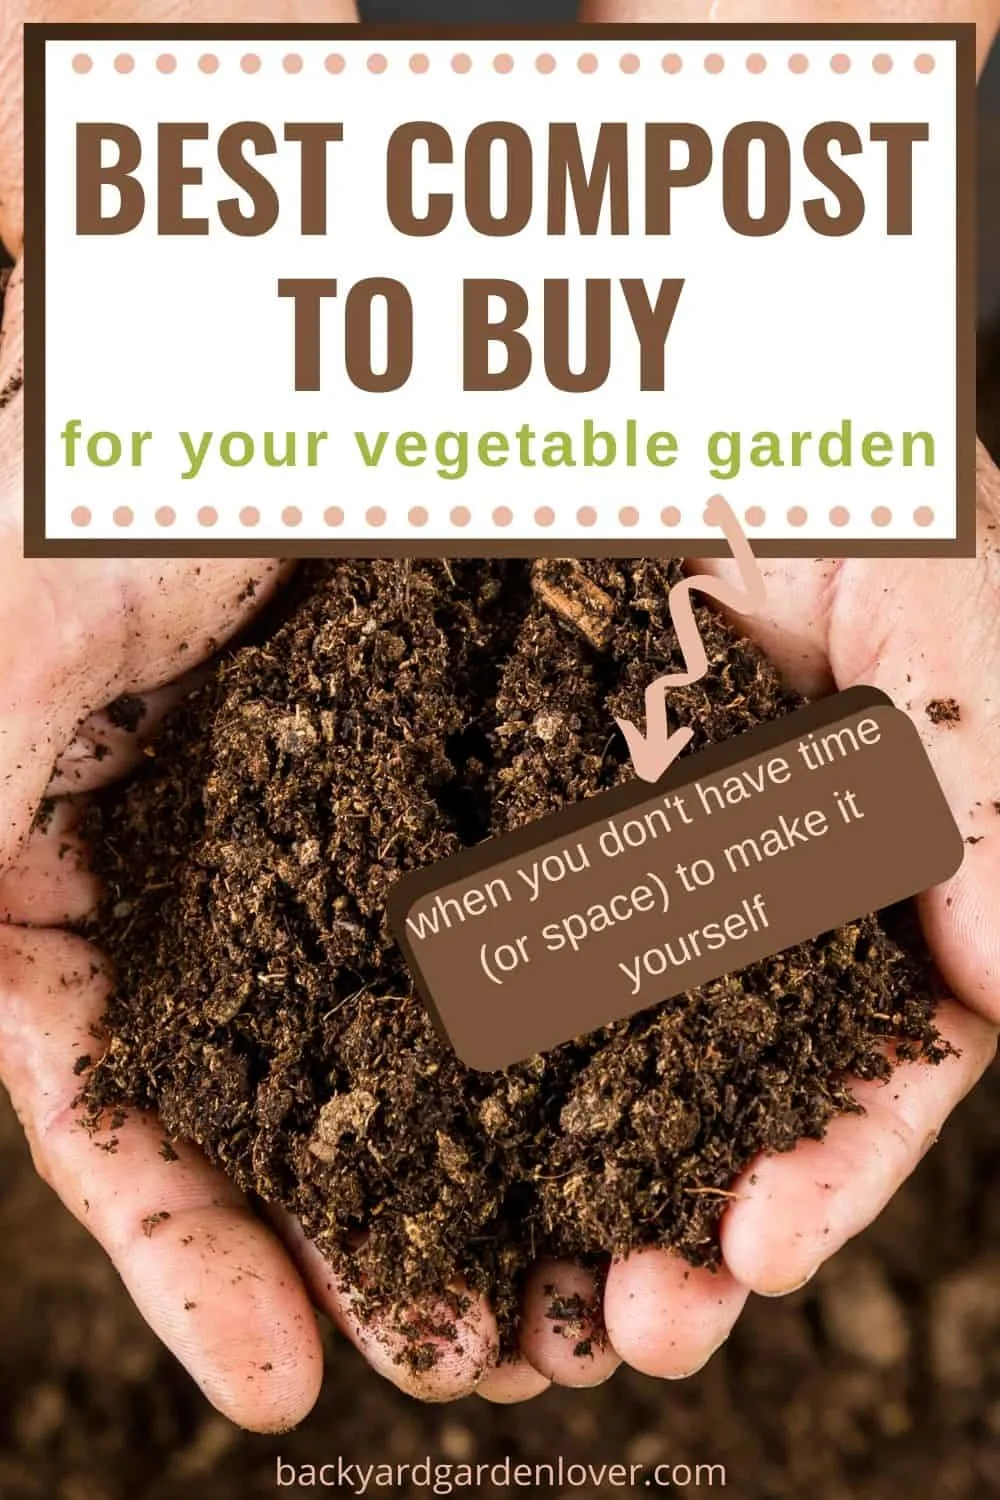 The best compost to buy for vegetable garden